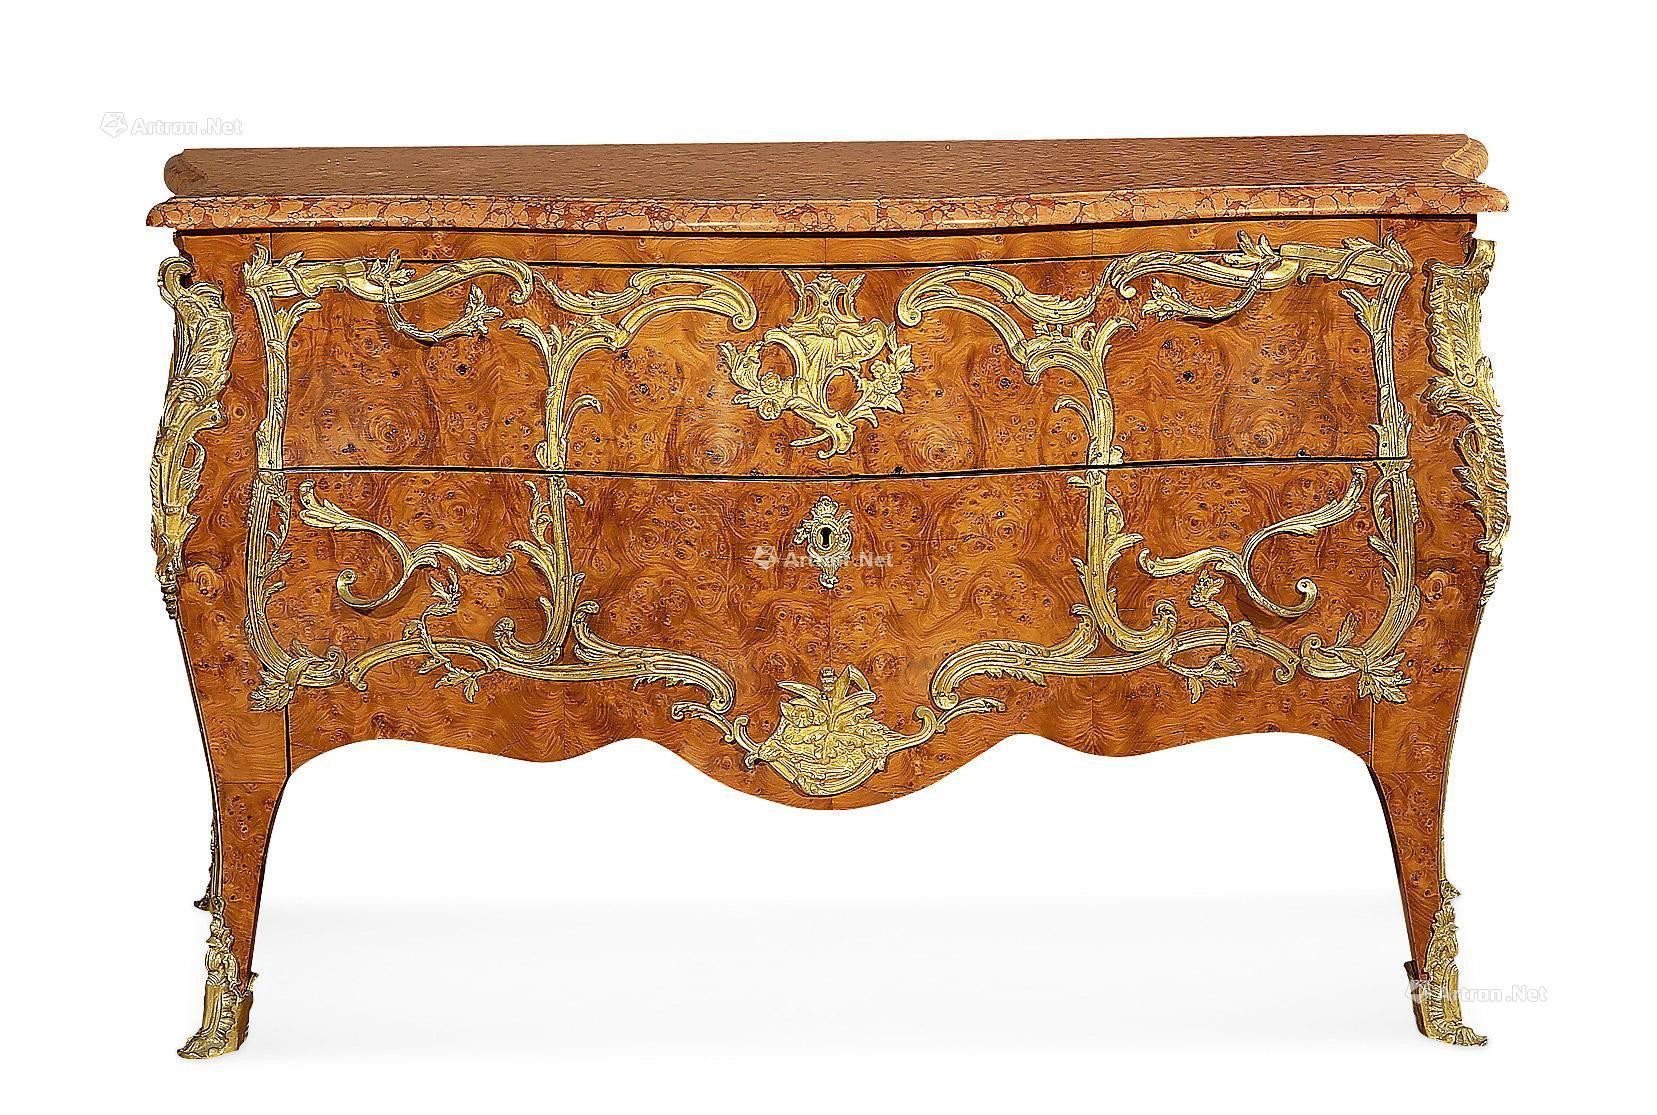 A ROCOCO STYLE FRENCH GILT BRONZE COMMODE